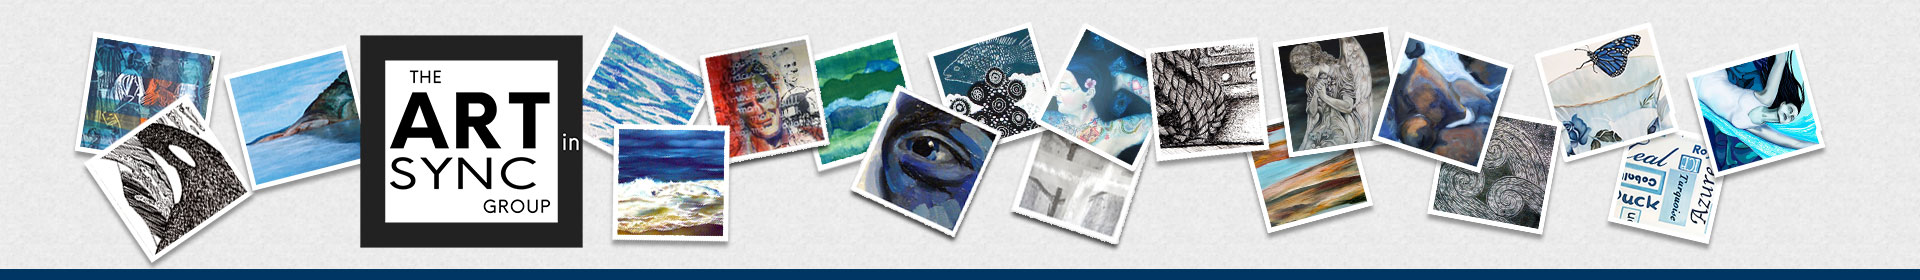 Art in Sync group header image